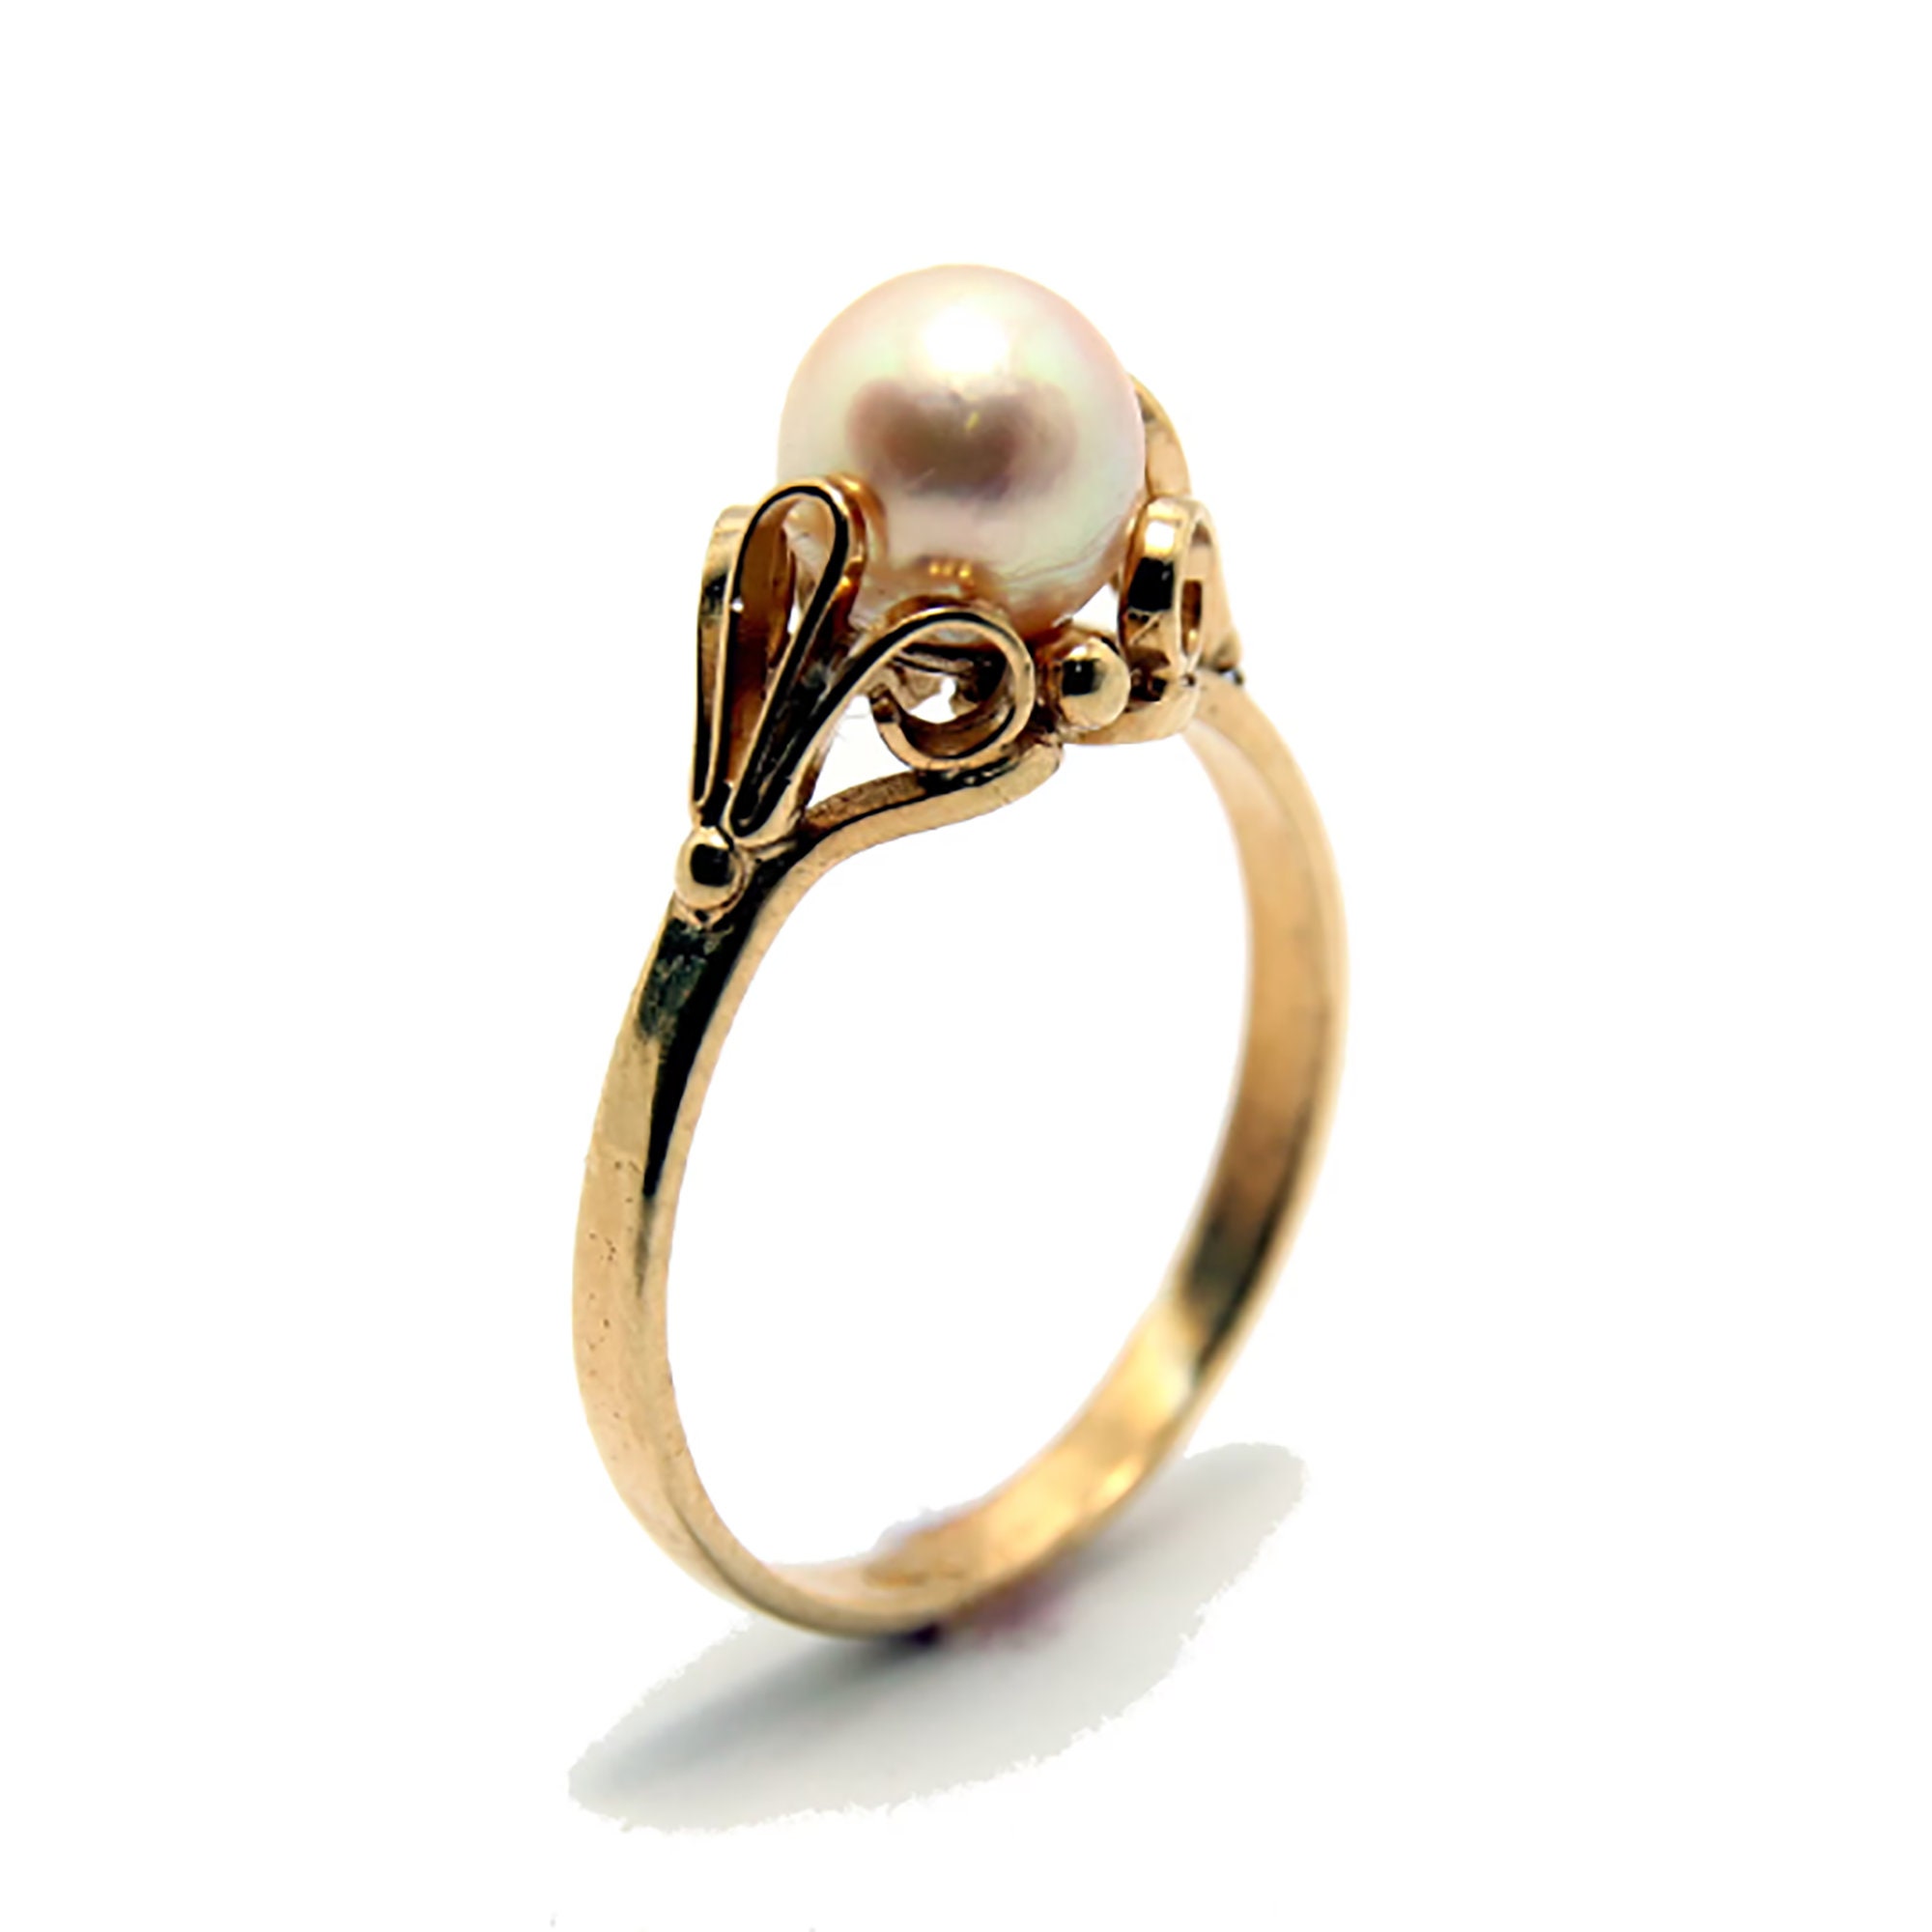 Brutalist Diamond And Pearl Ring 14k c. 1970 – Bavier Brook Antique Jewelry